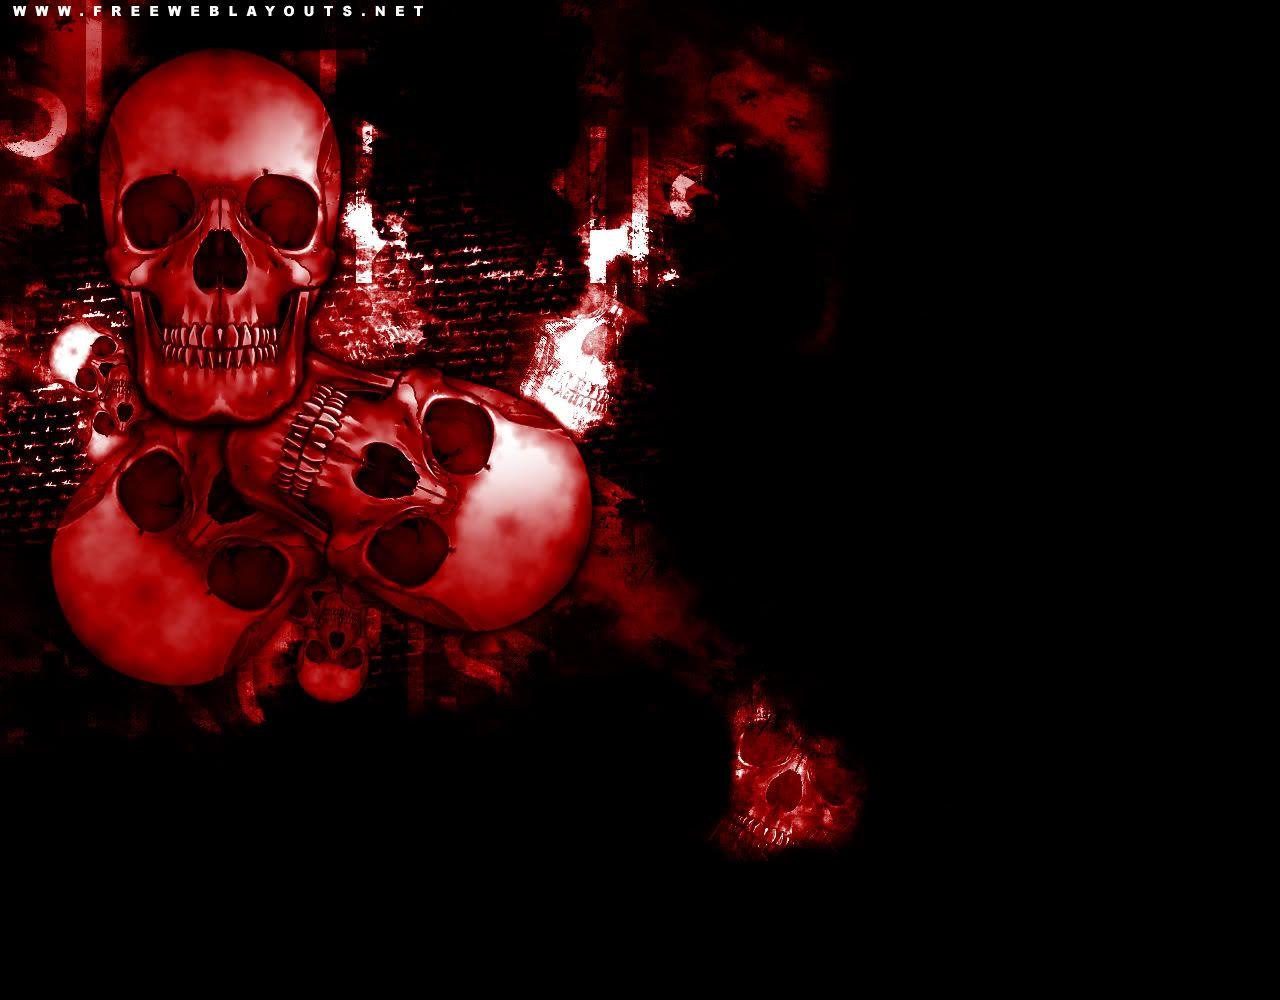 Red Skull Wallpapers Hd Red skull hd wallpapers red CALAVERAS 1280x1000.